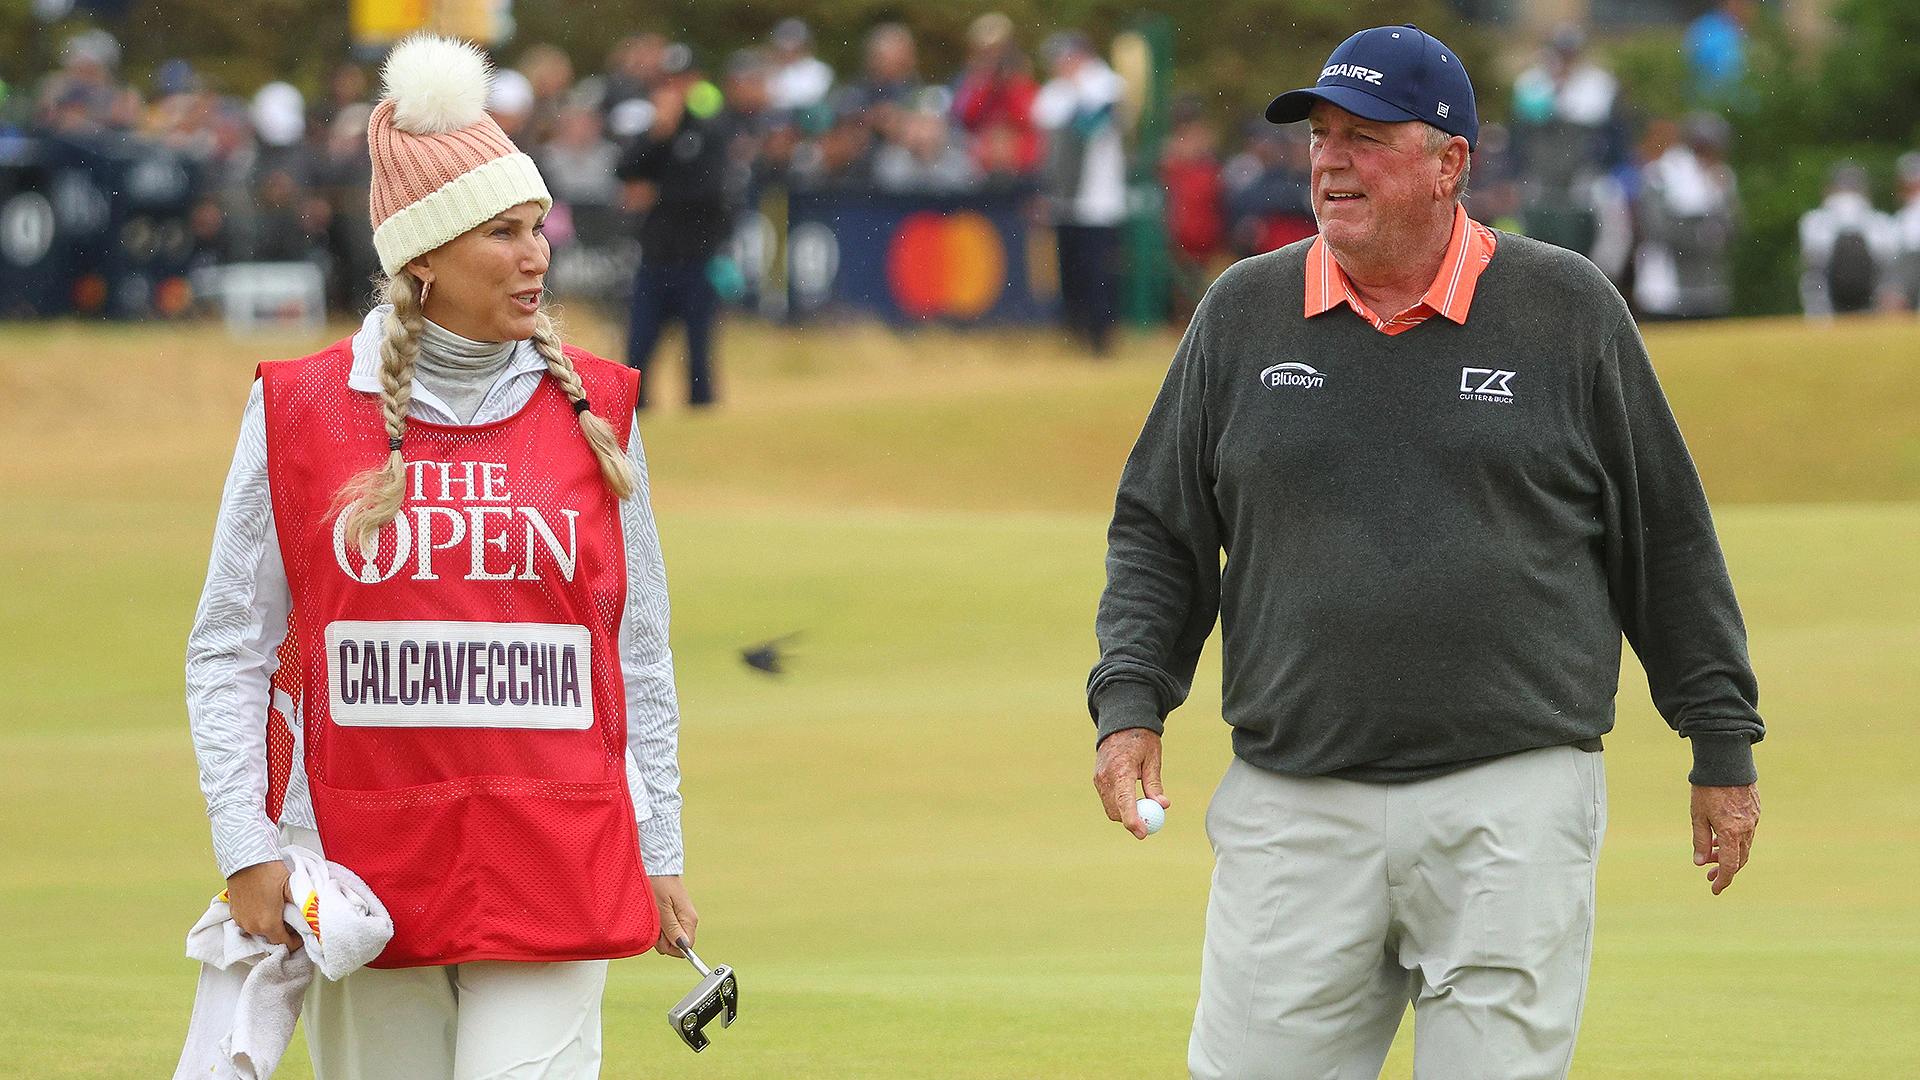 2022 British Open: Mark Calcavecchia bids farewell but doesn’t think it’s Tiger’s time: ‘He’ll be back’